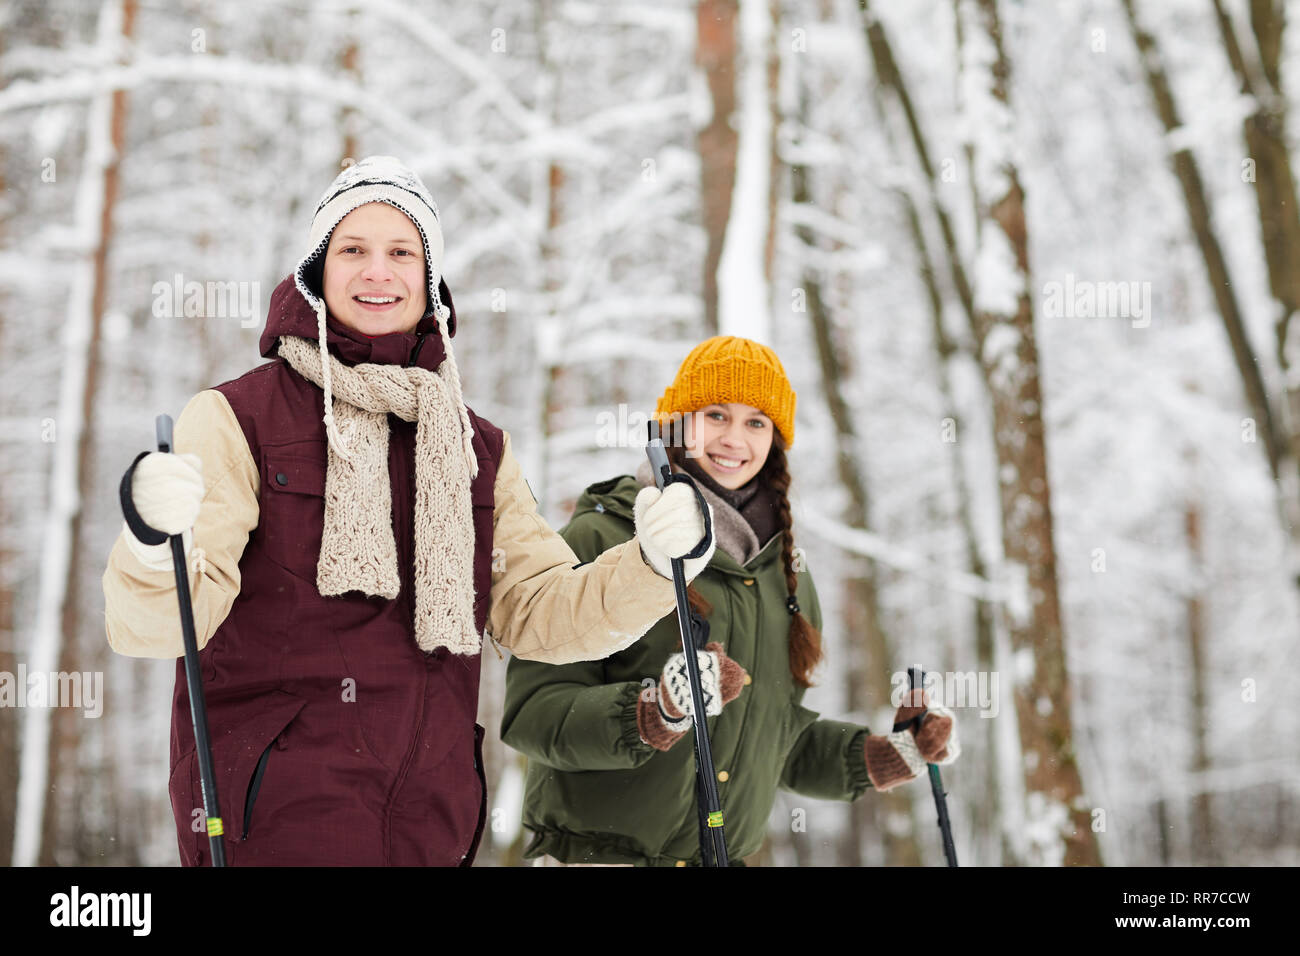 Smiling Couple Skiing in Forest Stock Photo